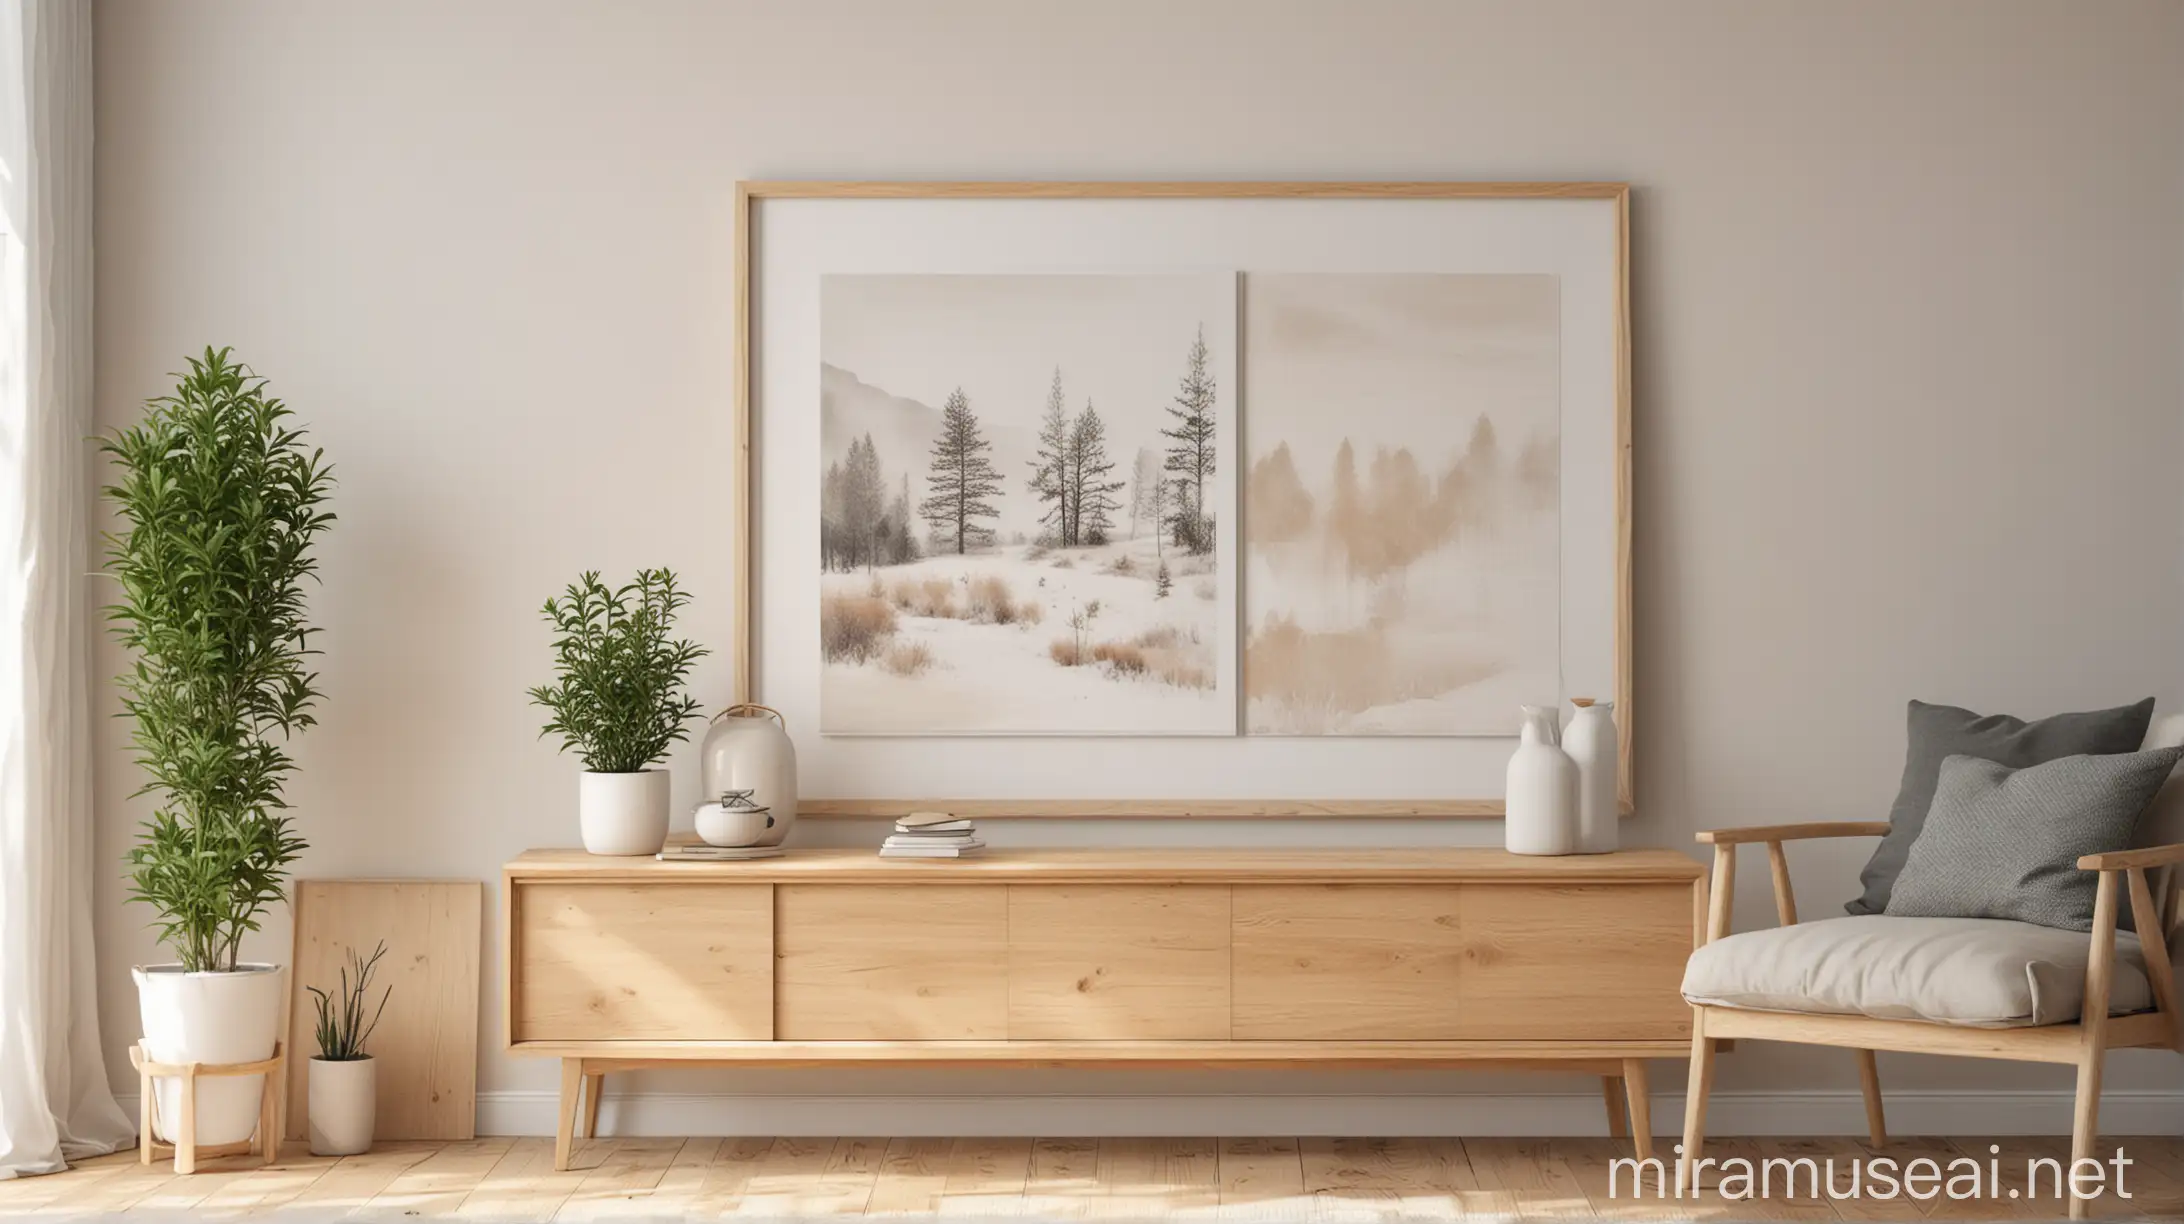 A mockup frame placed on a shelf in a Scandi-style living room, showcasing a blank white canvas for showcasing artwork or designs. The room is decorated with light wood furniture, neutral tones, and pops of vibrant color.